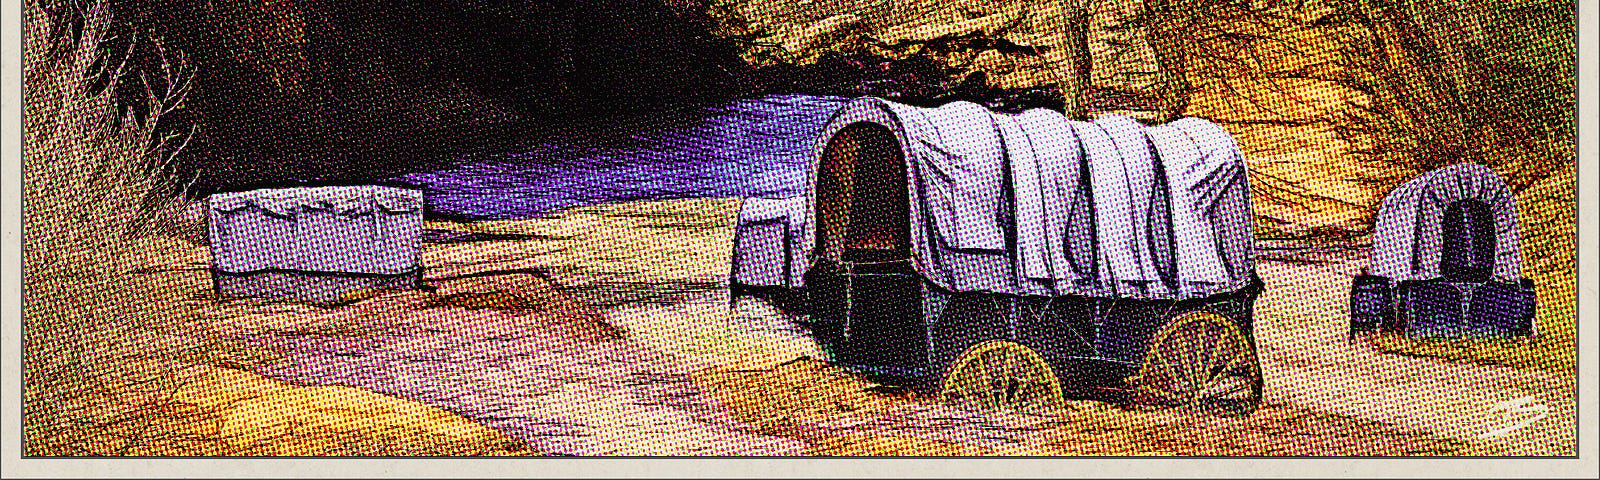 Covered wagons sinking into quicksand